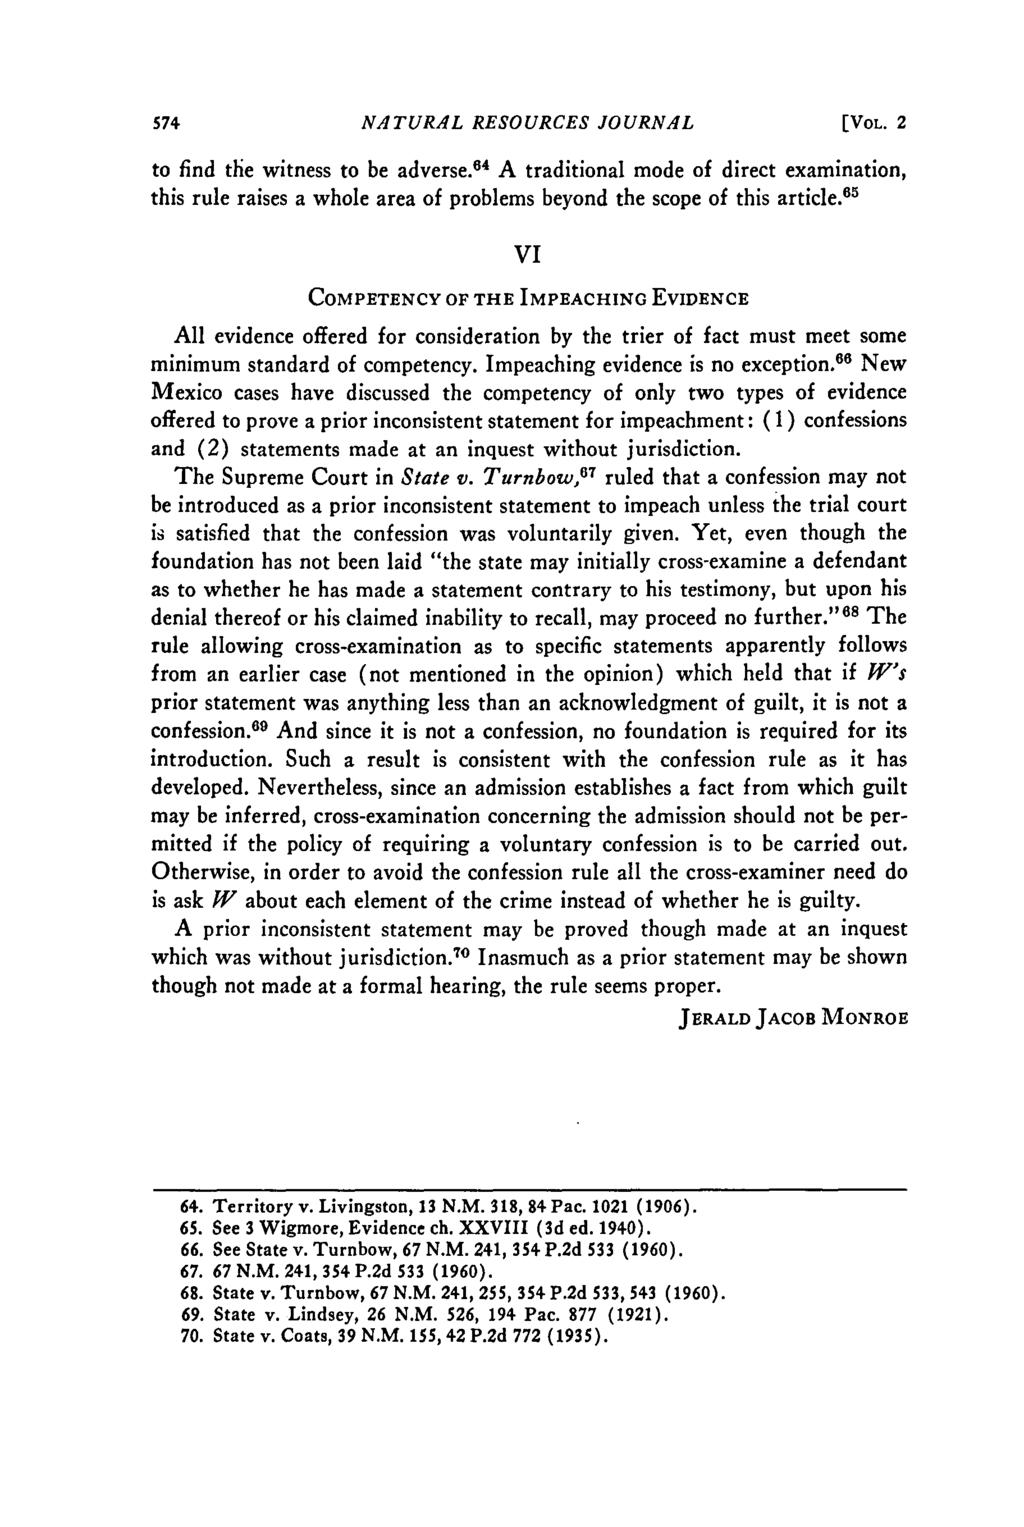 NATURAL RESOURCES JOURNAL [VOL. 2 to find the witness to be adverse. 6 4 A traditional mode of direct examination, this rule raises a whole area of problems beyond the scope of this article.